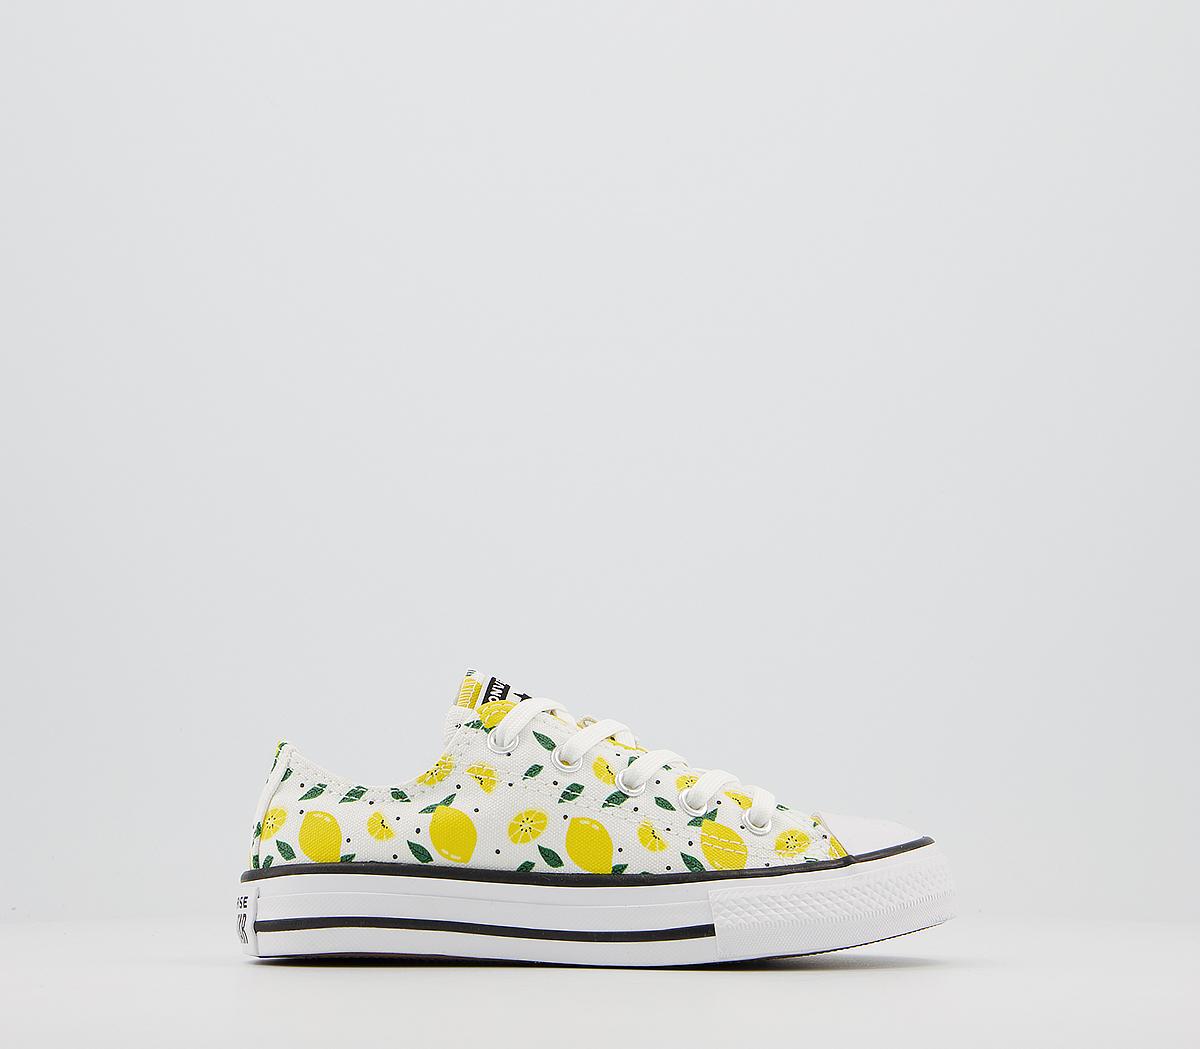 ConverseAll Star Low Youth TrainersWhite Yellow Green Lemon